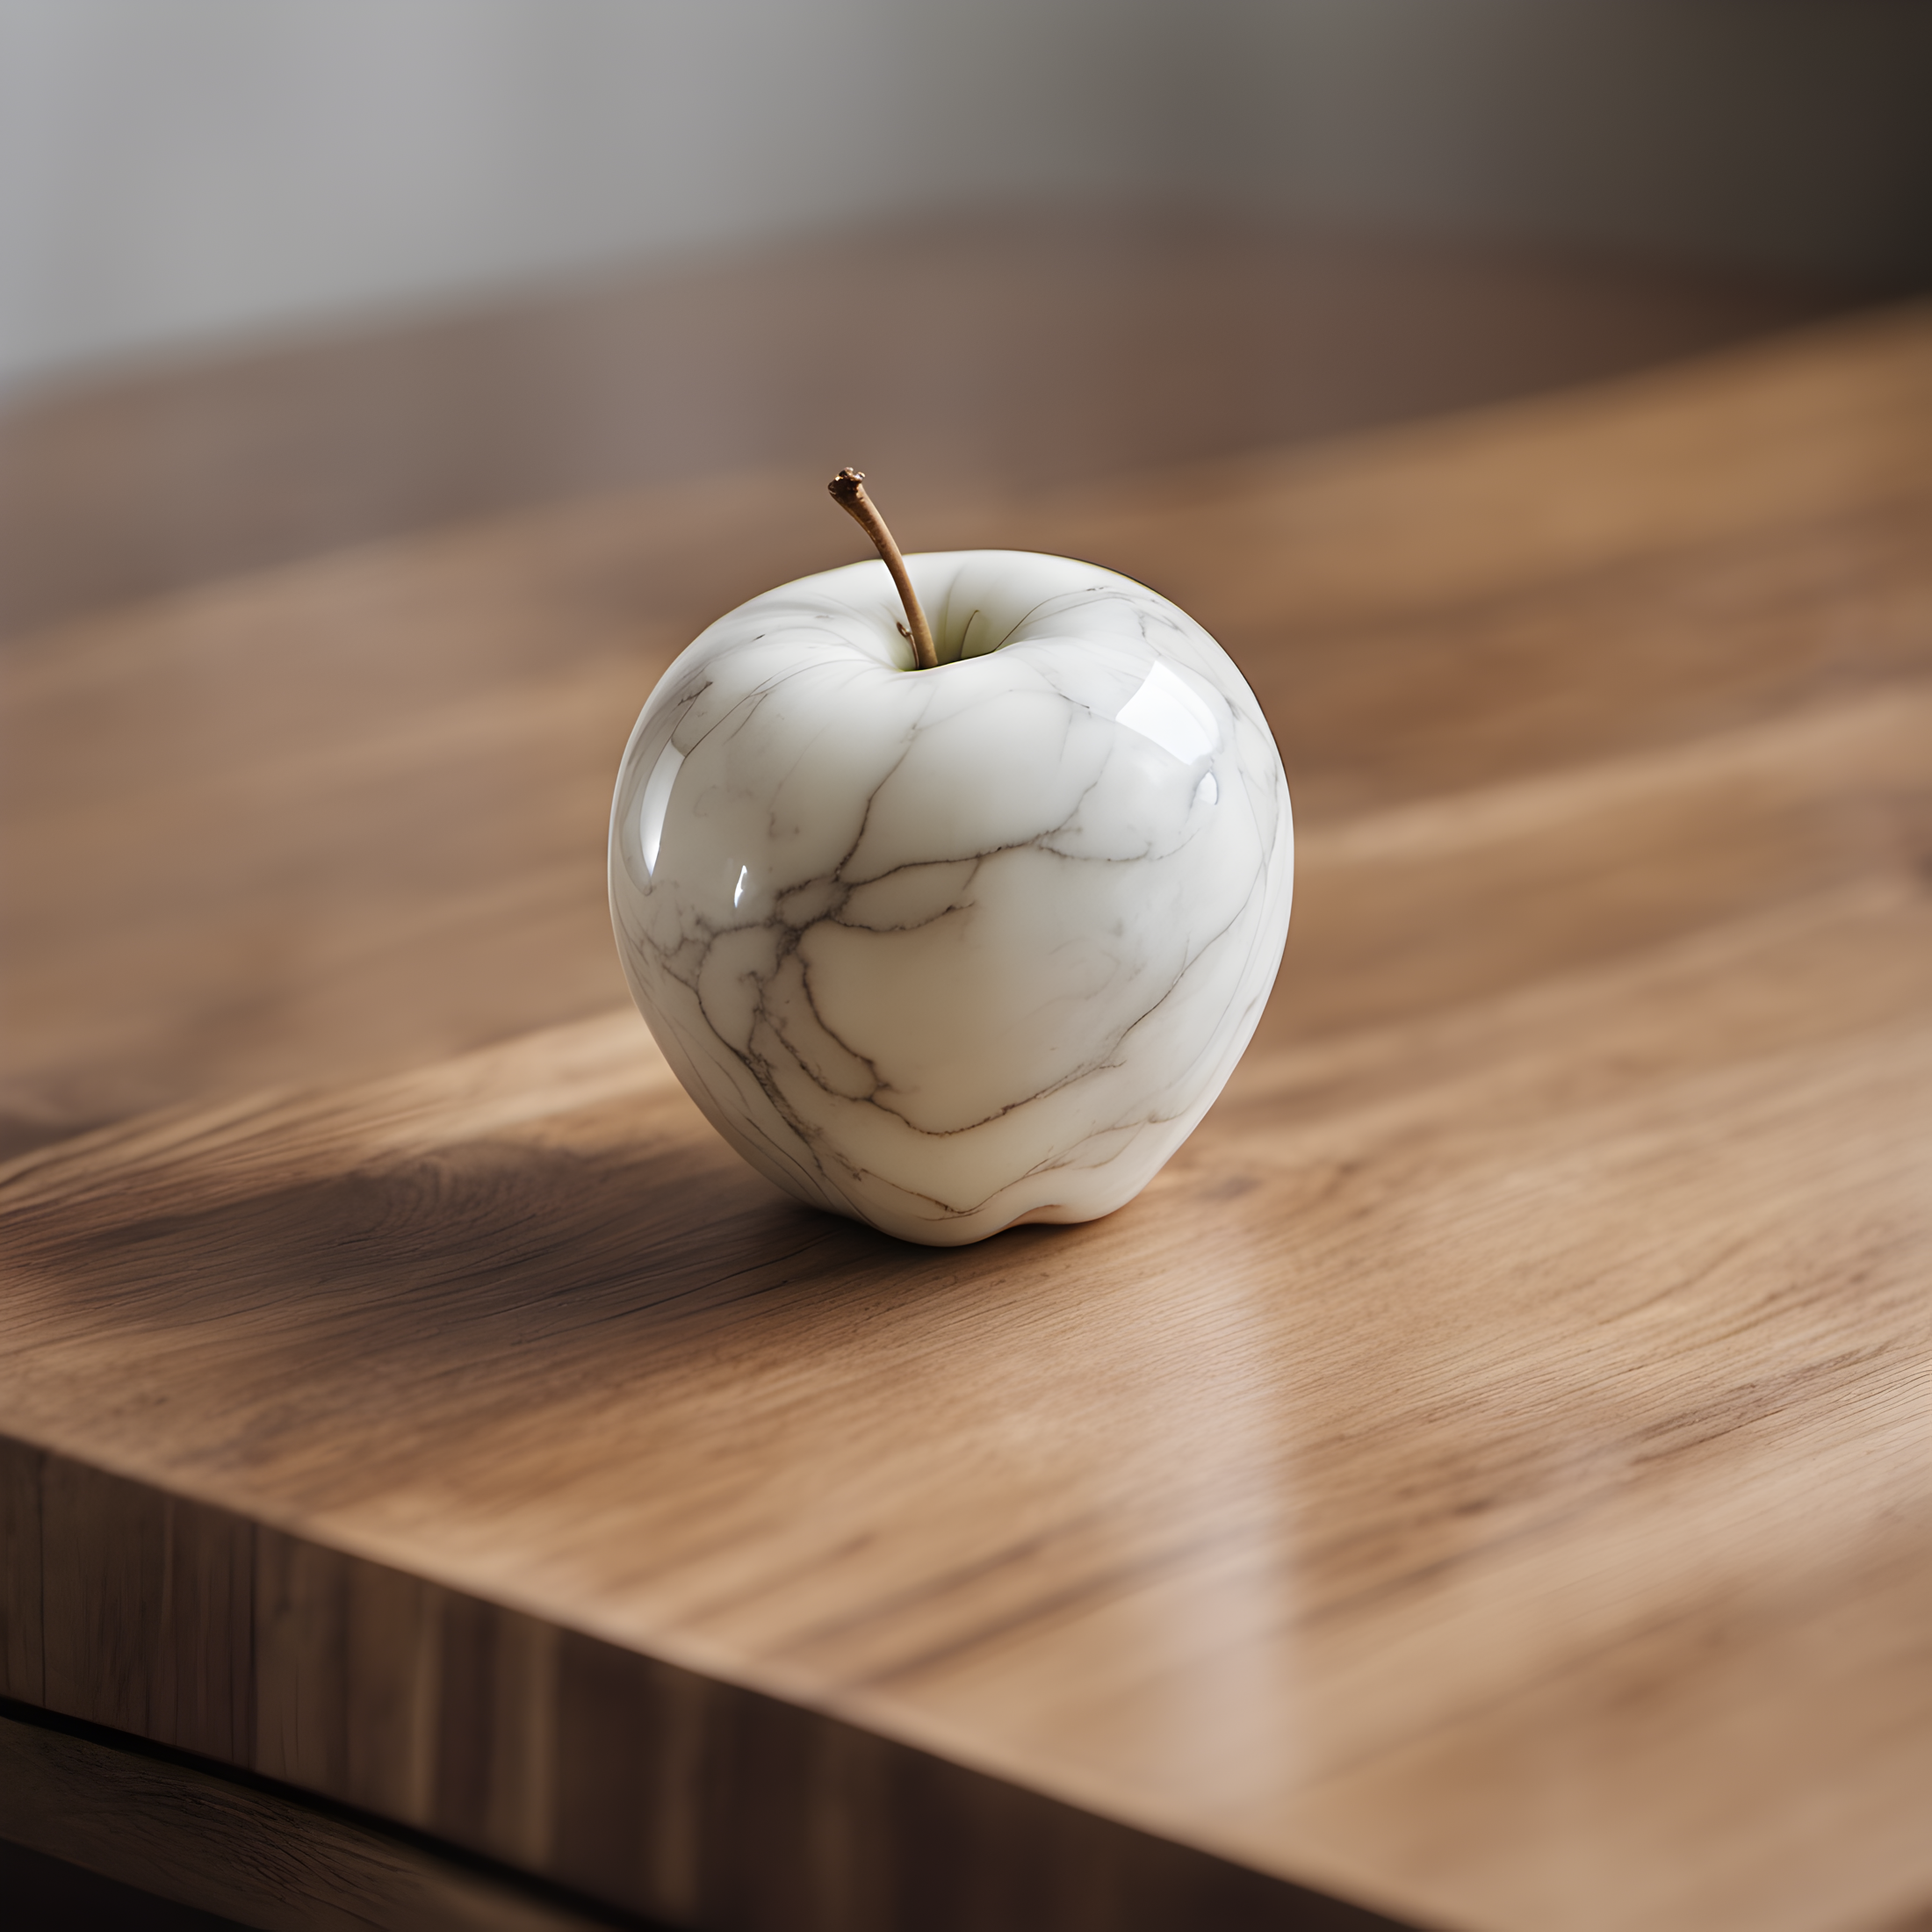 professional closeup photo of 1 white marble apple on wooden table, detailed, film grain